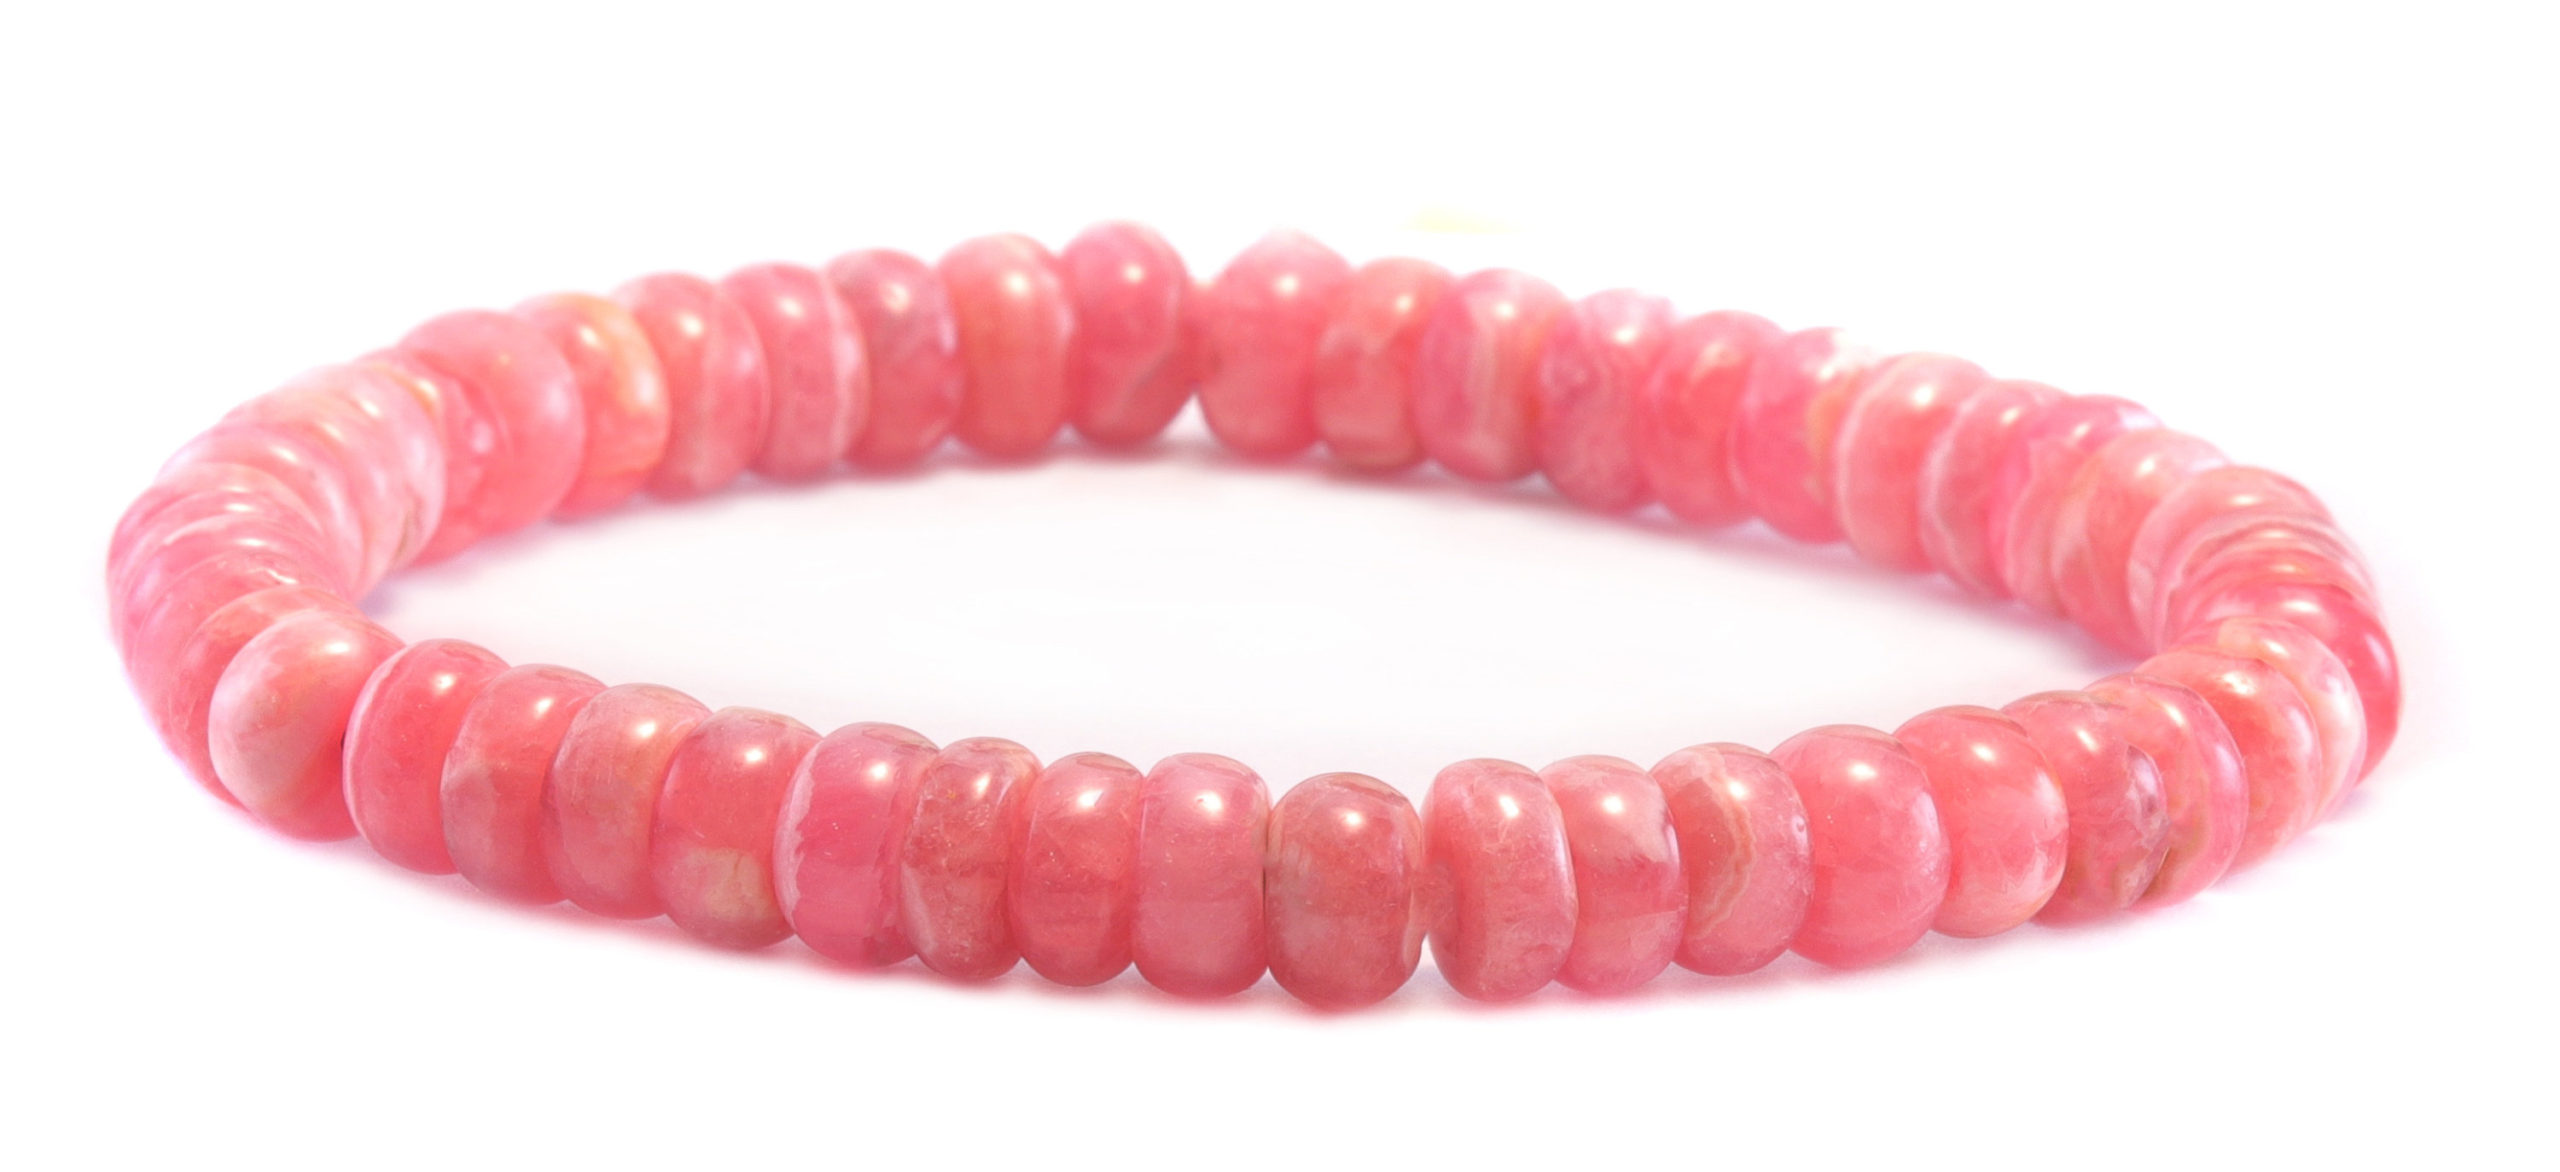 Rhodochrosite Bracelet Natural Soft Pink Round Smooth Stones Solid Strand Stretchy Aaa Quality  Spyglass Designs 6.5  7 Inch Adjustable